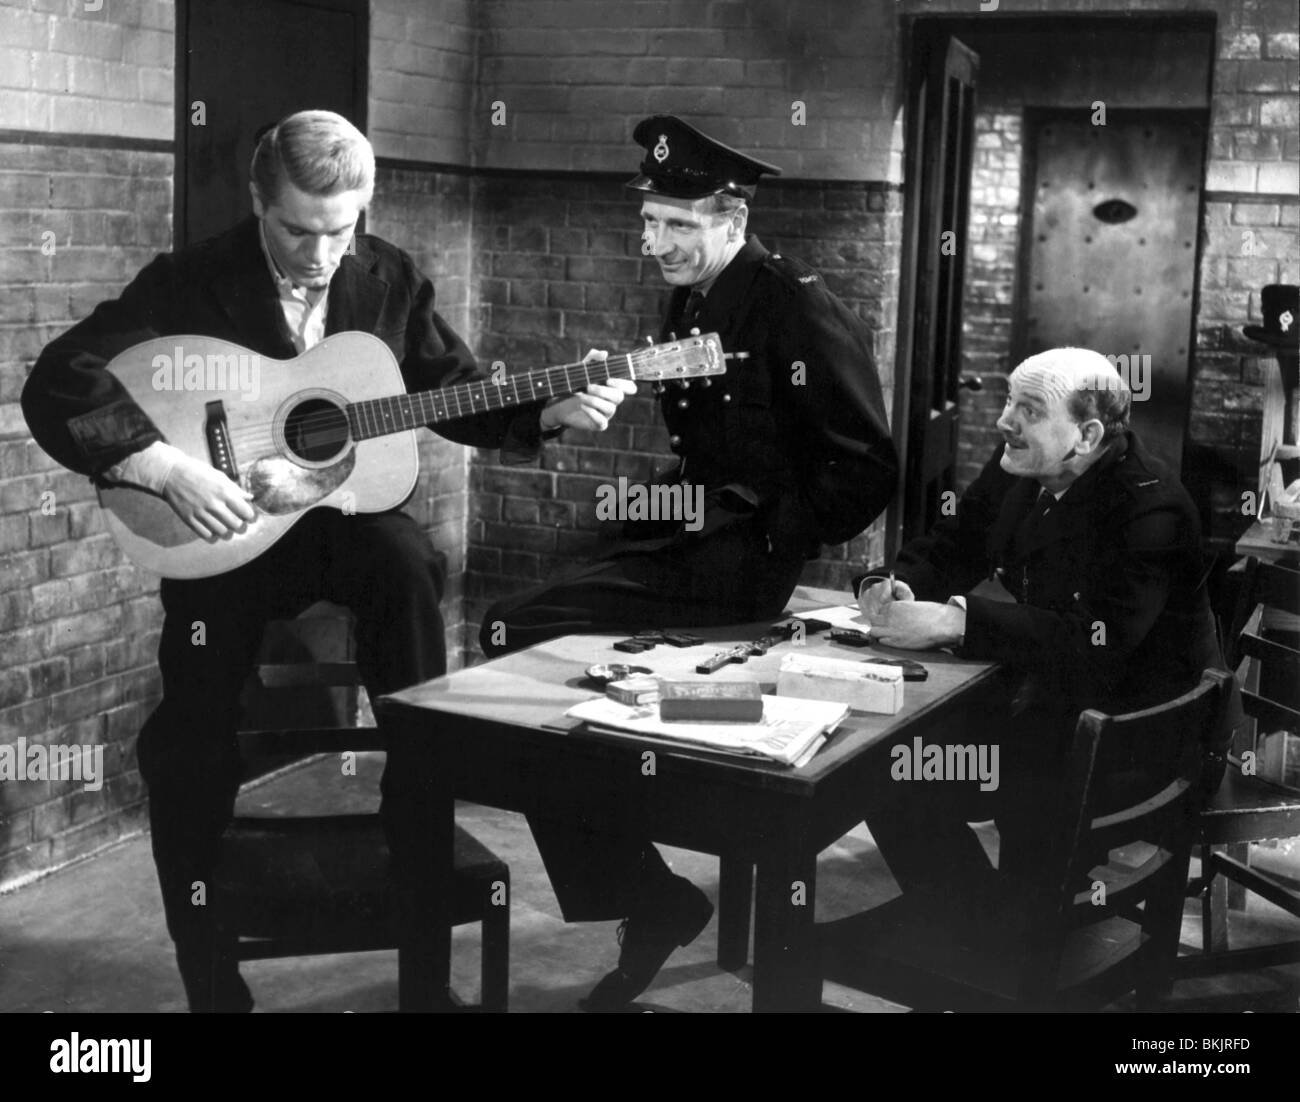 MIX ME A PERSON (1962) ADAM FAITH, ALFRED BURKE, MEREDITH EDWARDS MMAP 001P Stock Photo